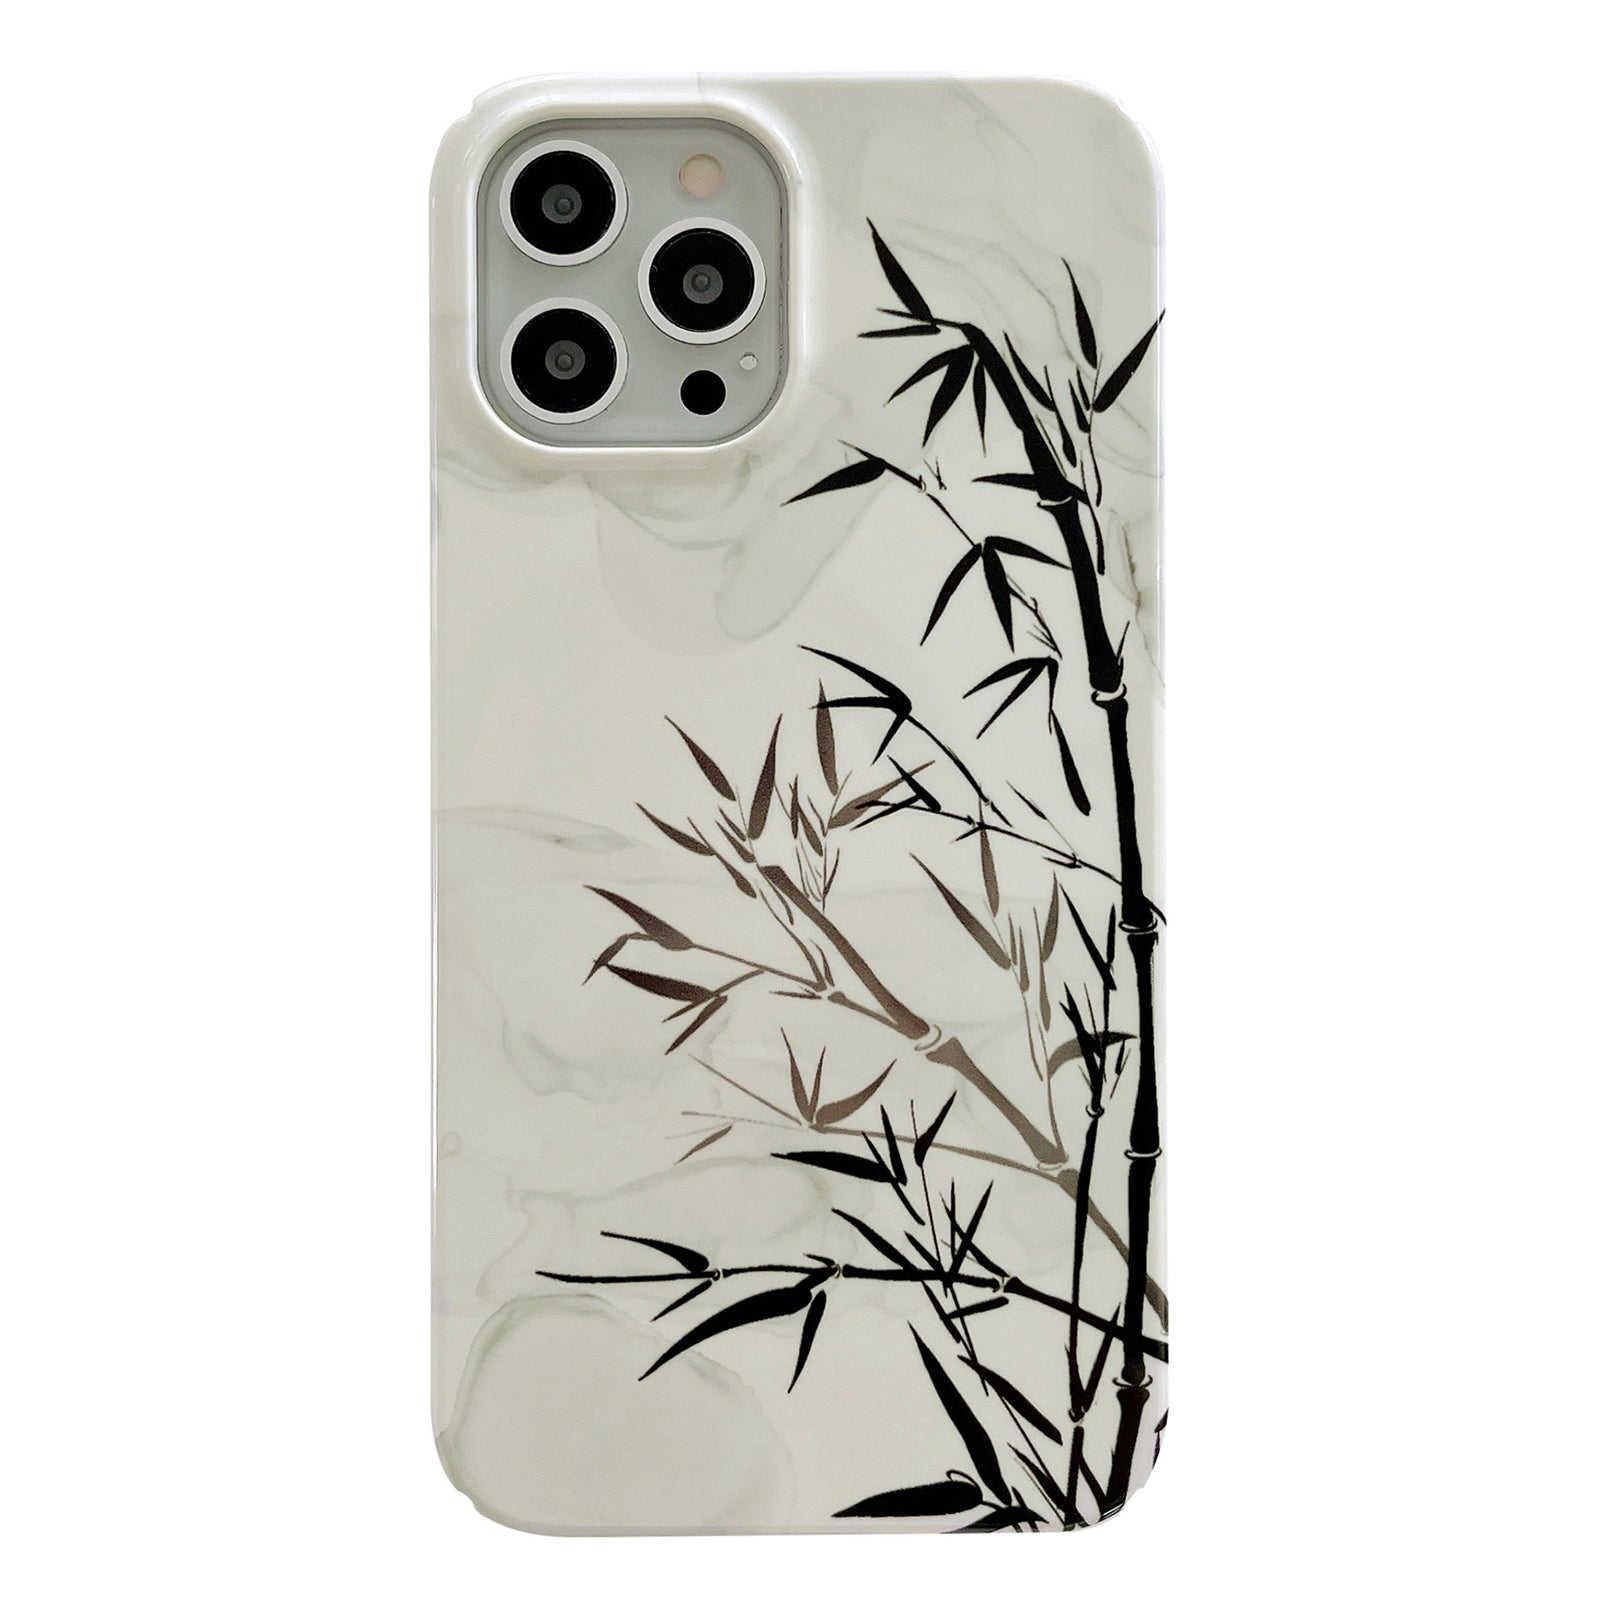 Uniqkart for iPhone 12 Pro Max 6.7 inch Hard PC Phone Case Pattern Printing Protective Glossy Phone Shell - Bamboo Ink Painting